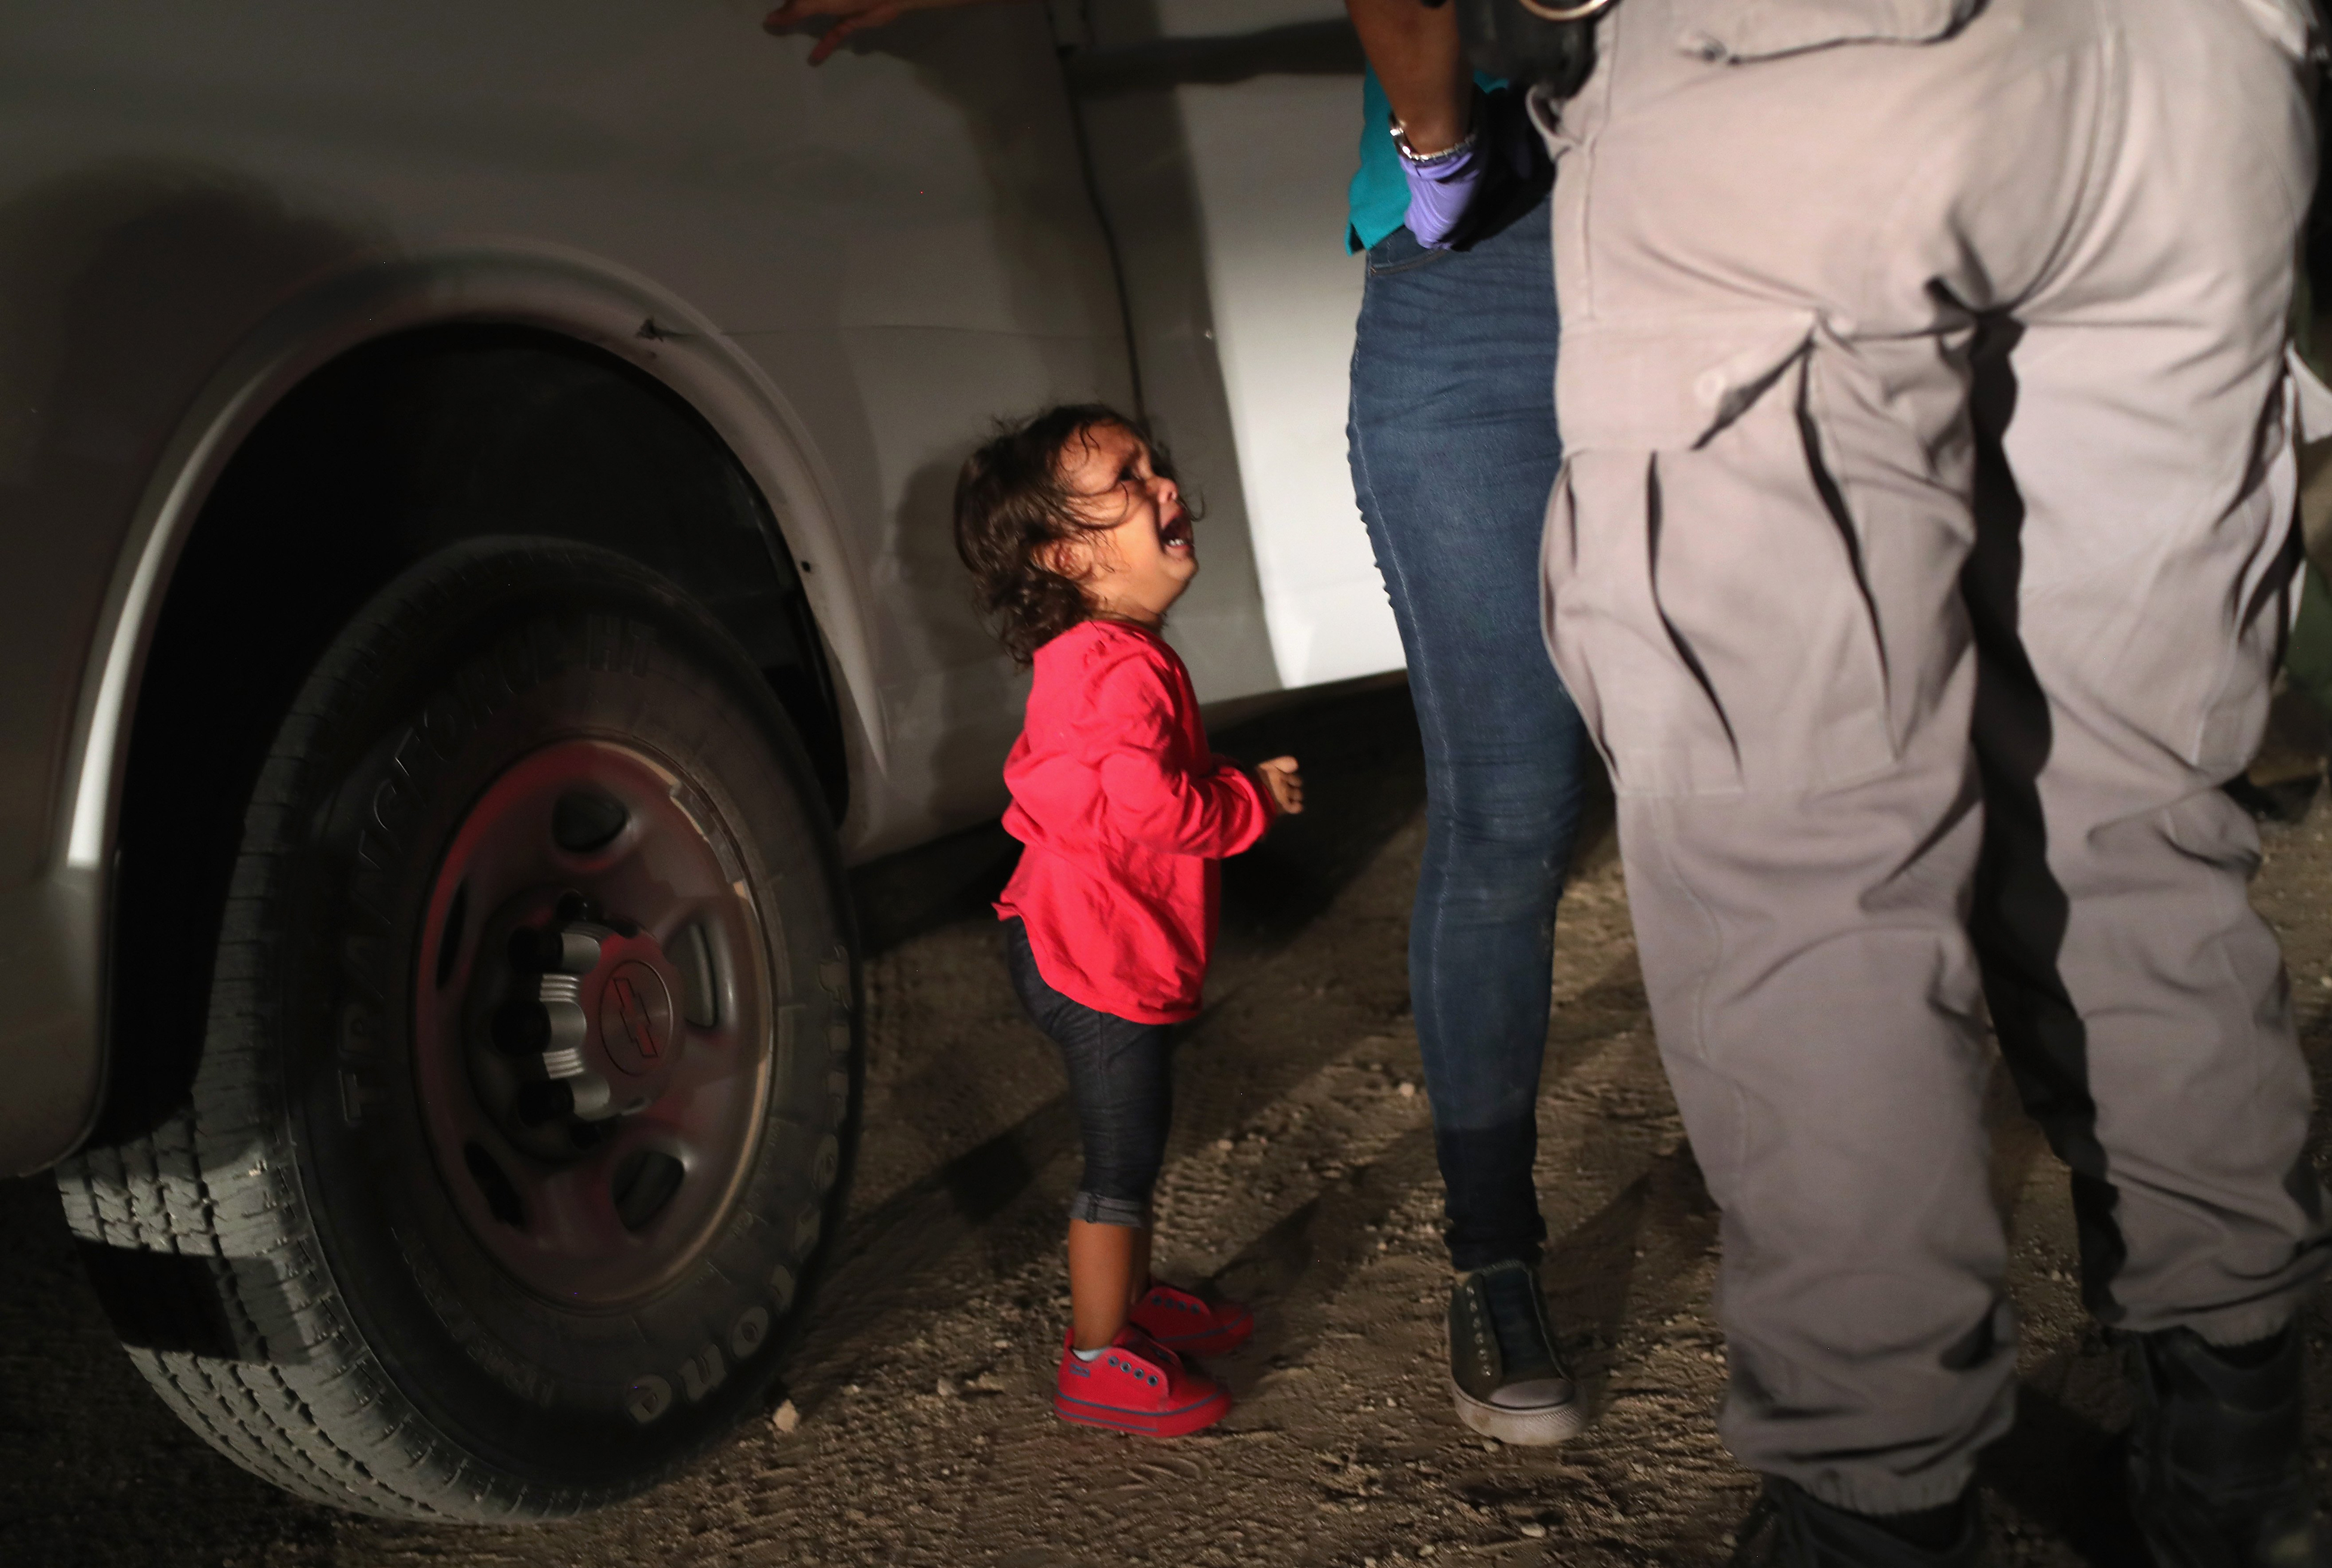 A two-year-old Honduran asylum seeker cries as her mother is searched and detained near the U.S.-Mexico border in McAllen, Texas on June 12, 2018. (John Moore—Getty Images)